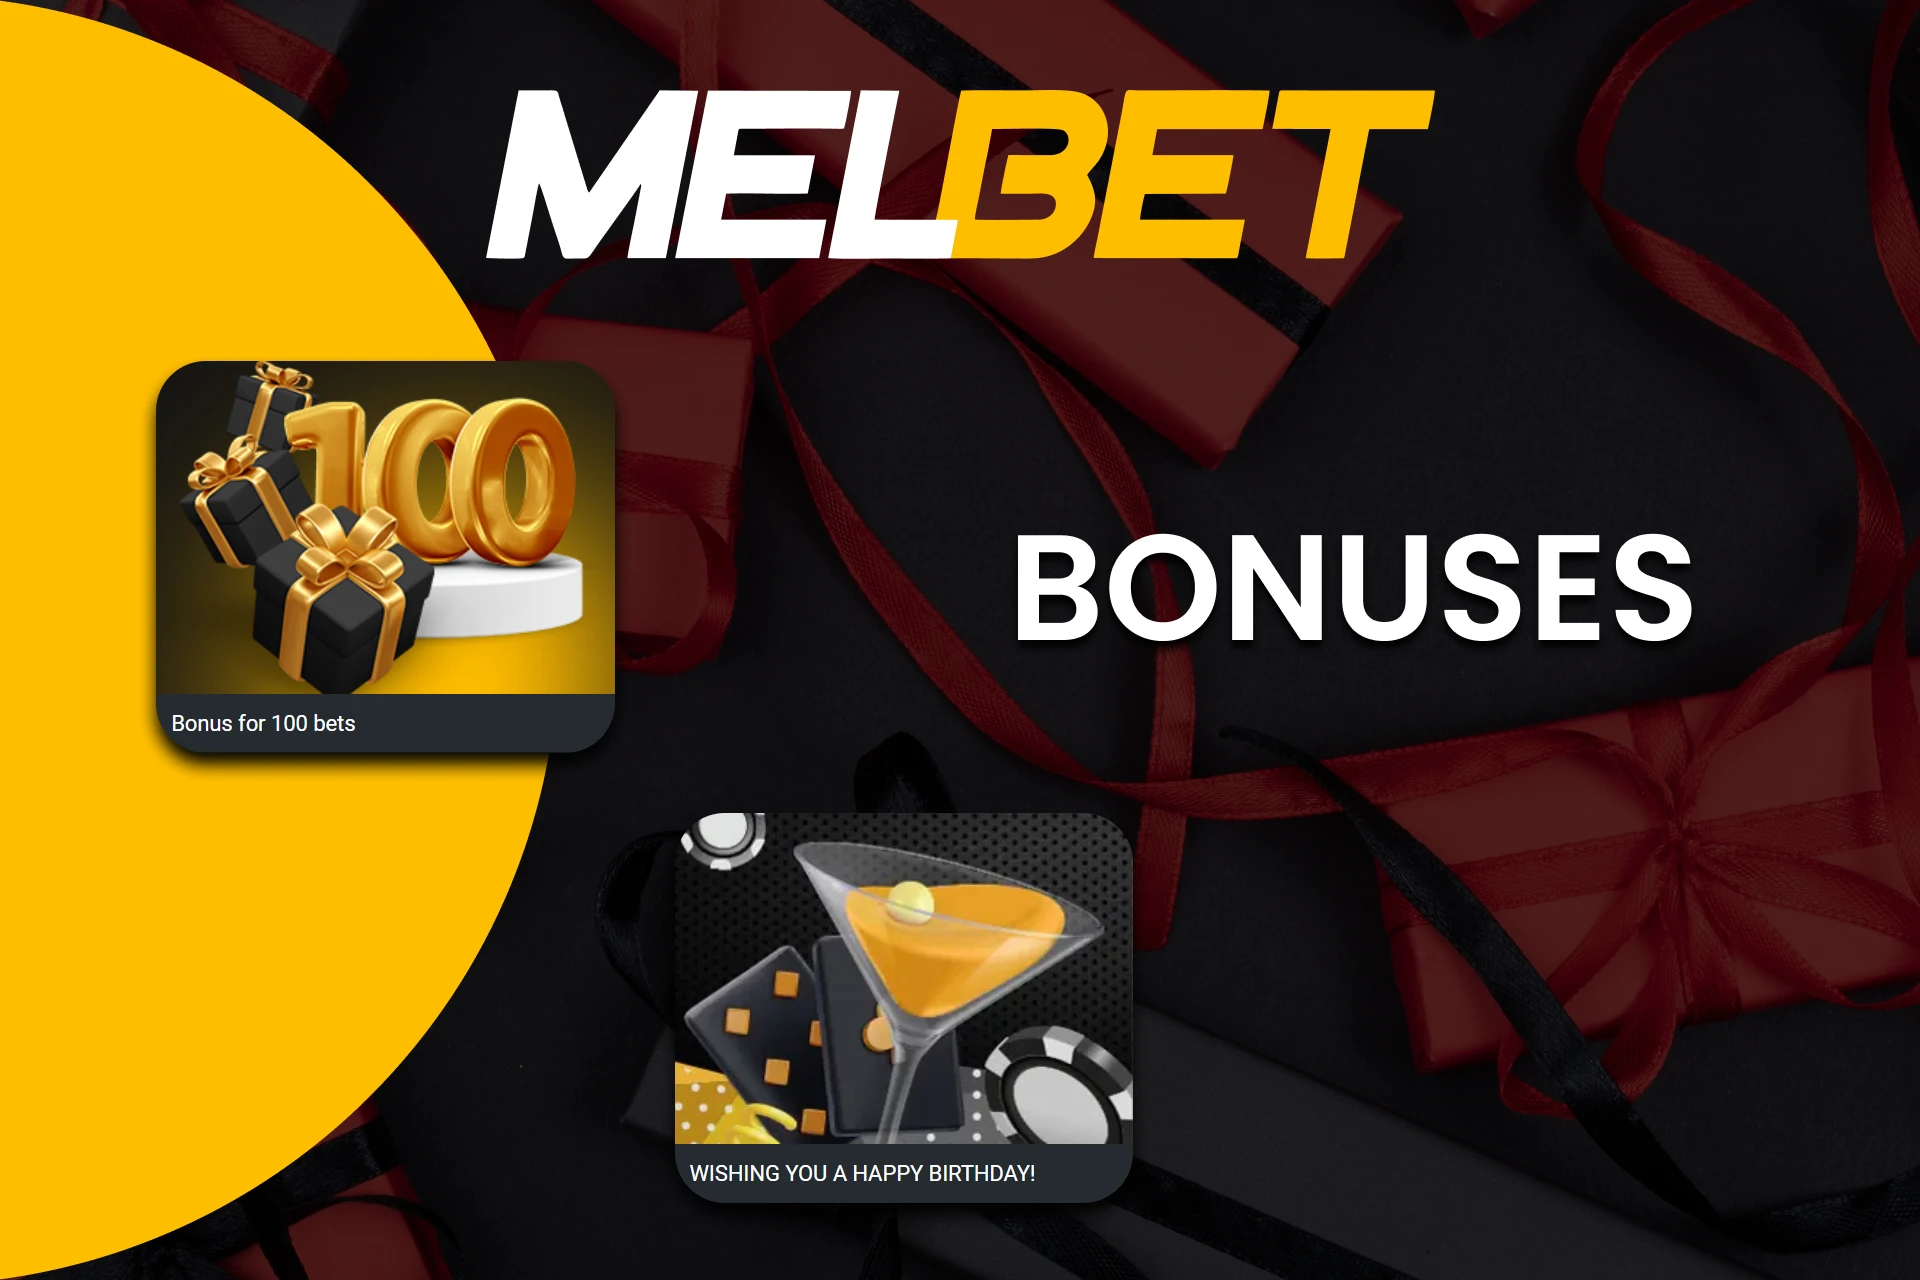 Melbet gives bonuses for betting on TOTO.